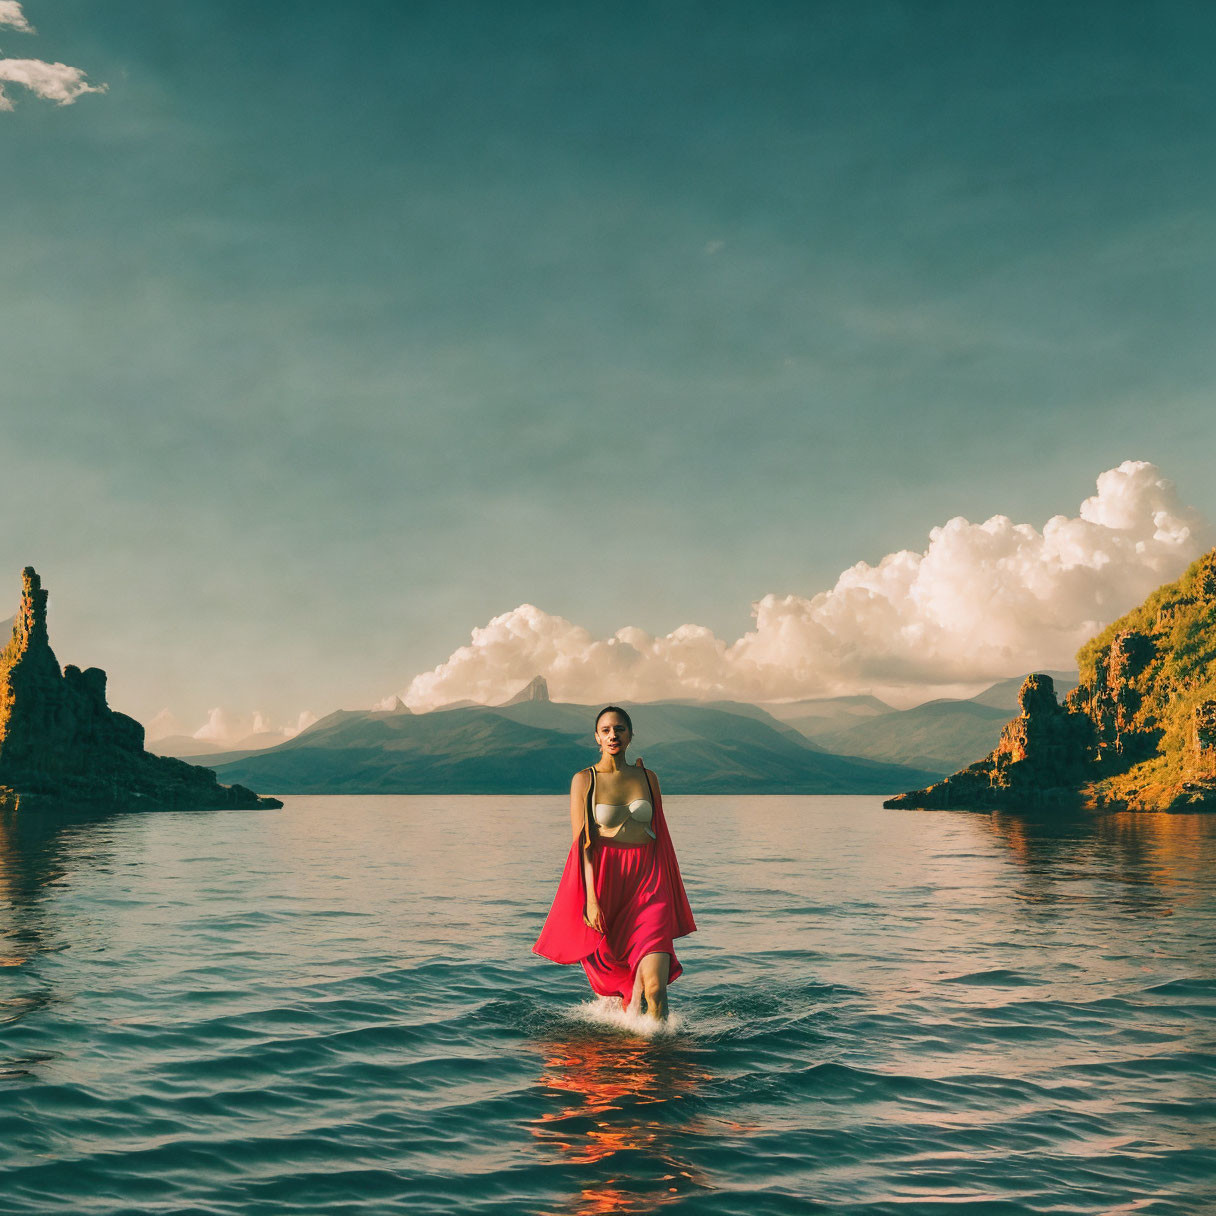 Red dress person wading in calm waters at sunset